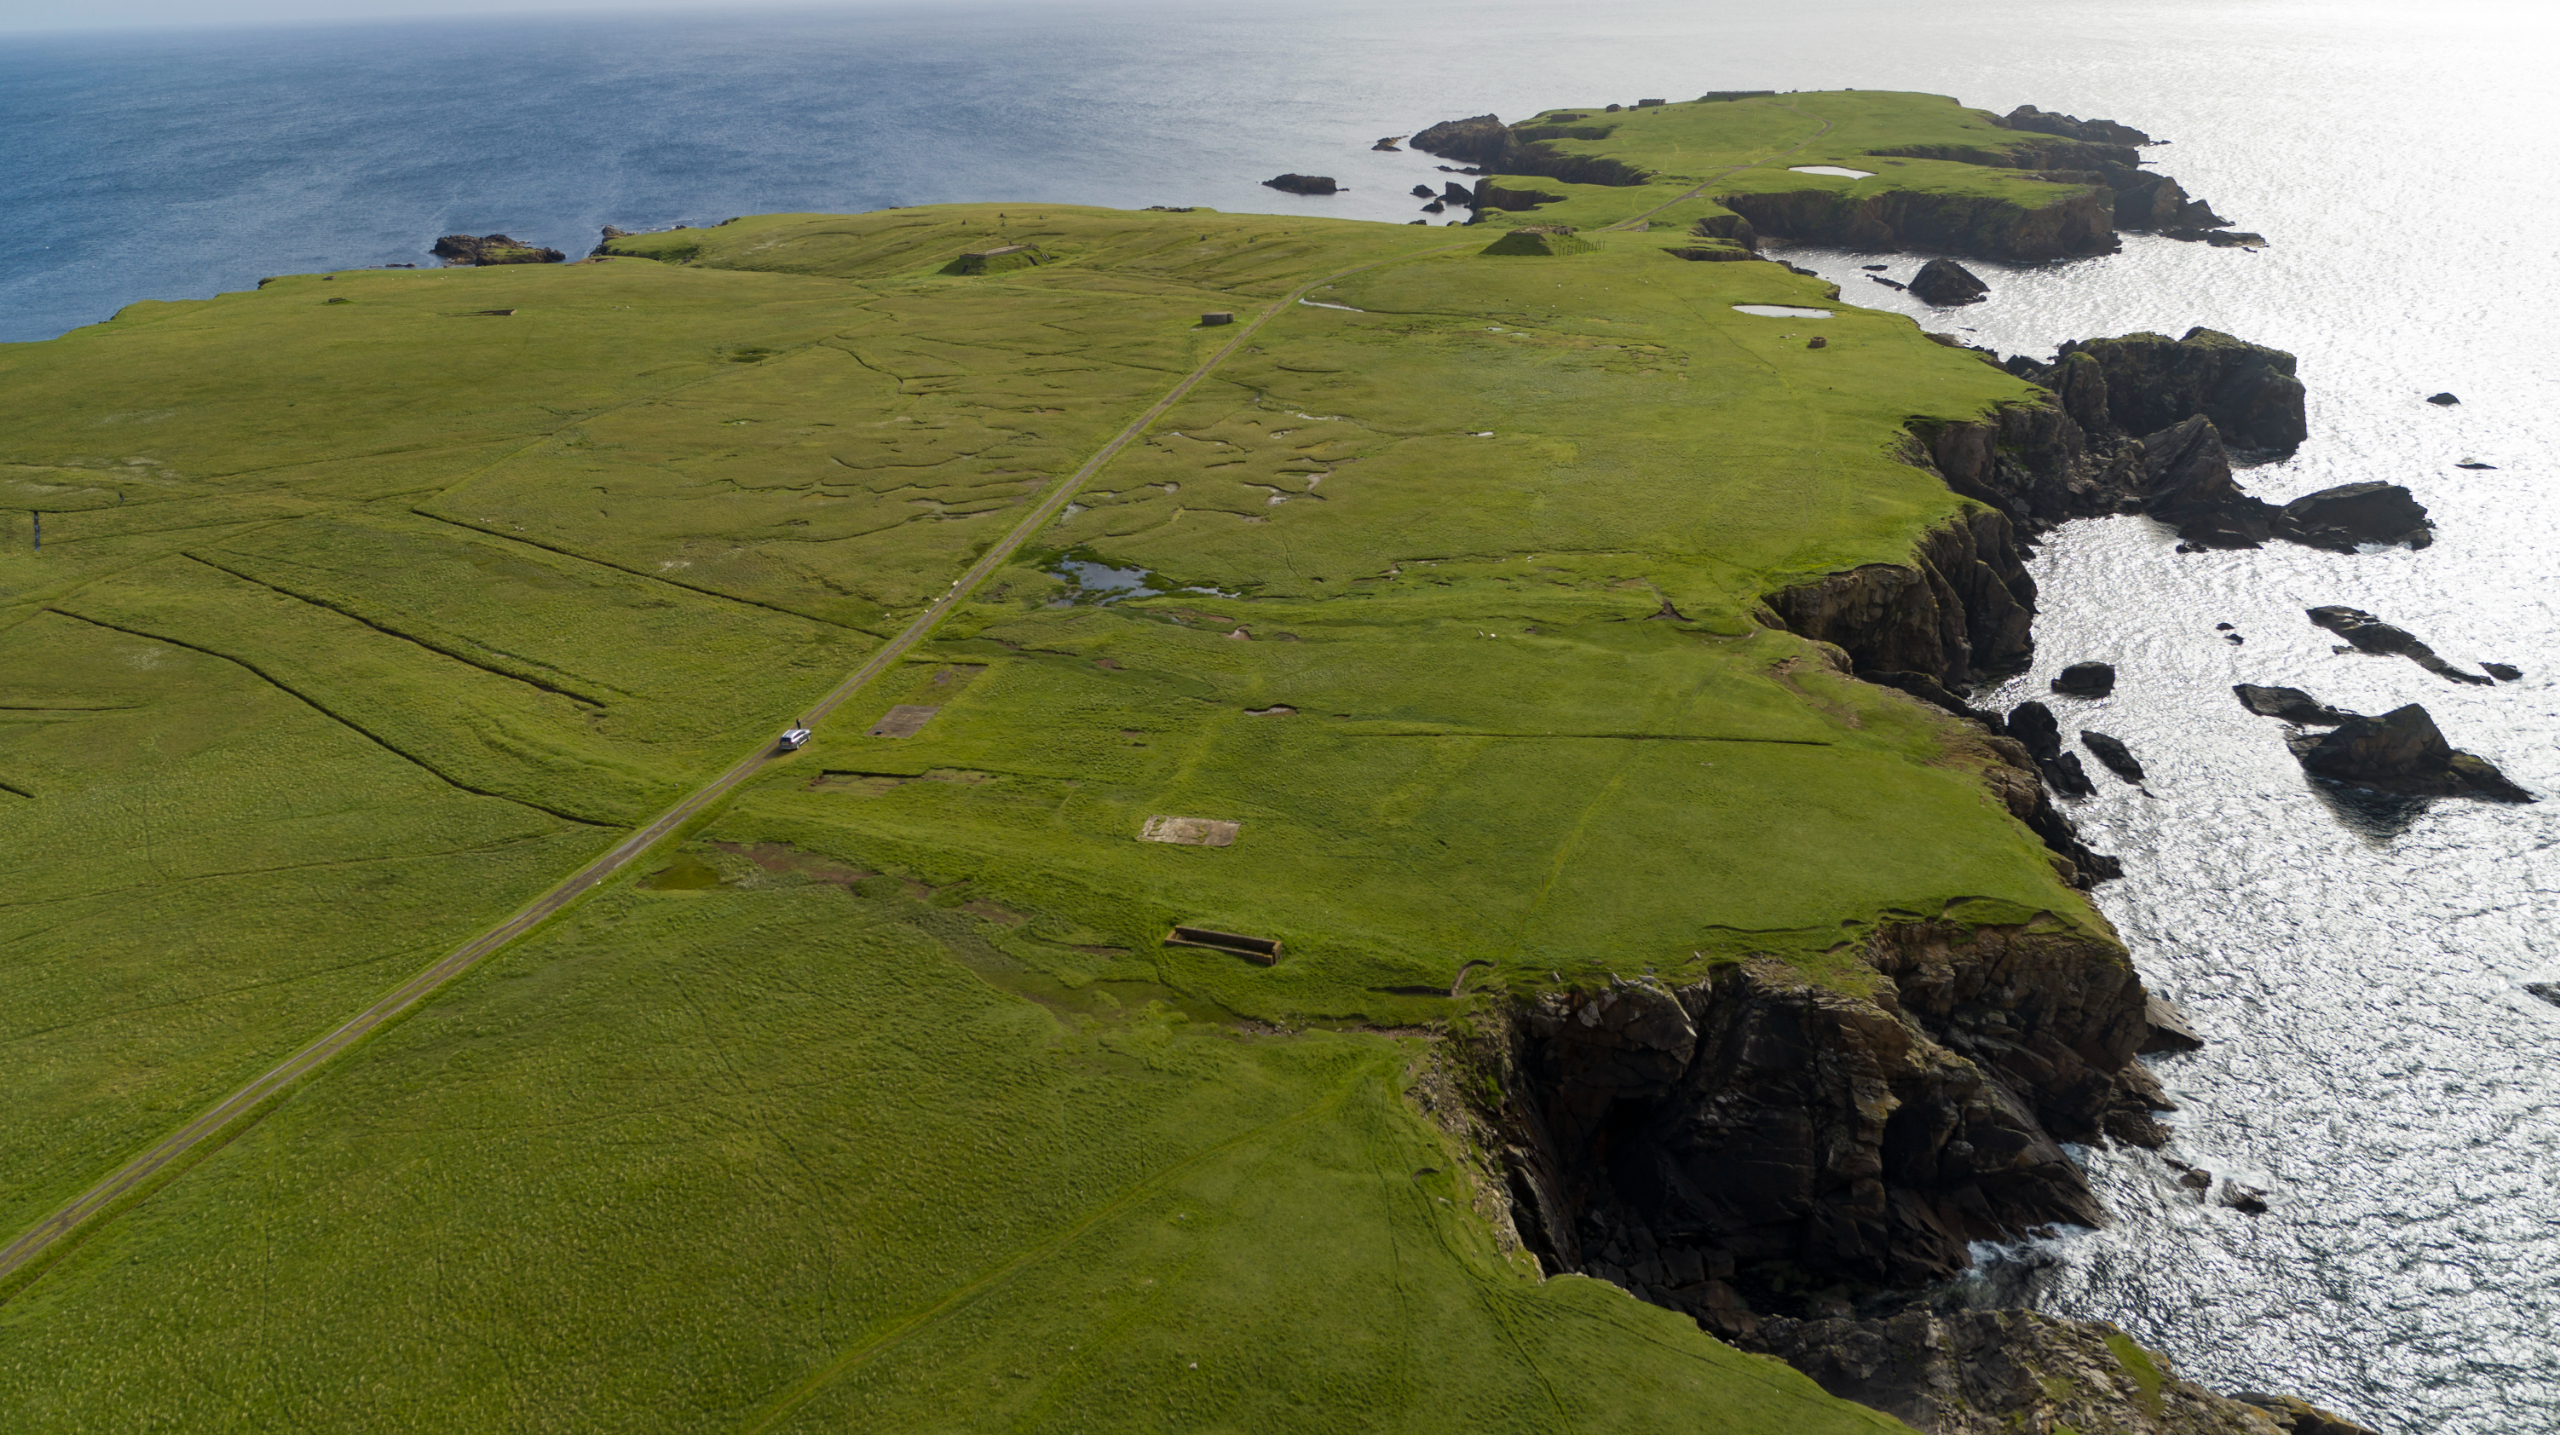 Lamba Ness in Unst is the proposed launch site for the SaxaVord Space Port.